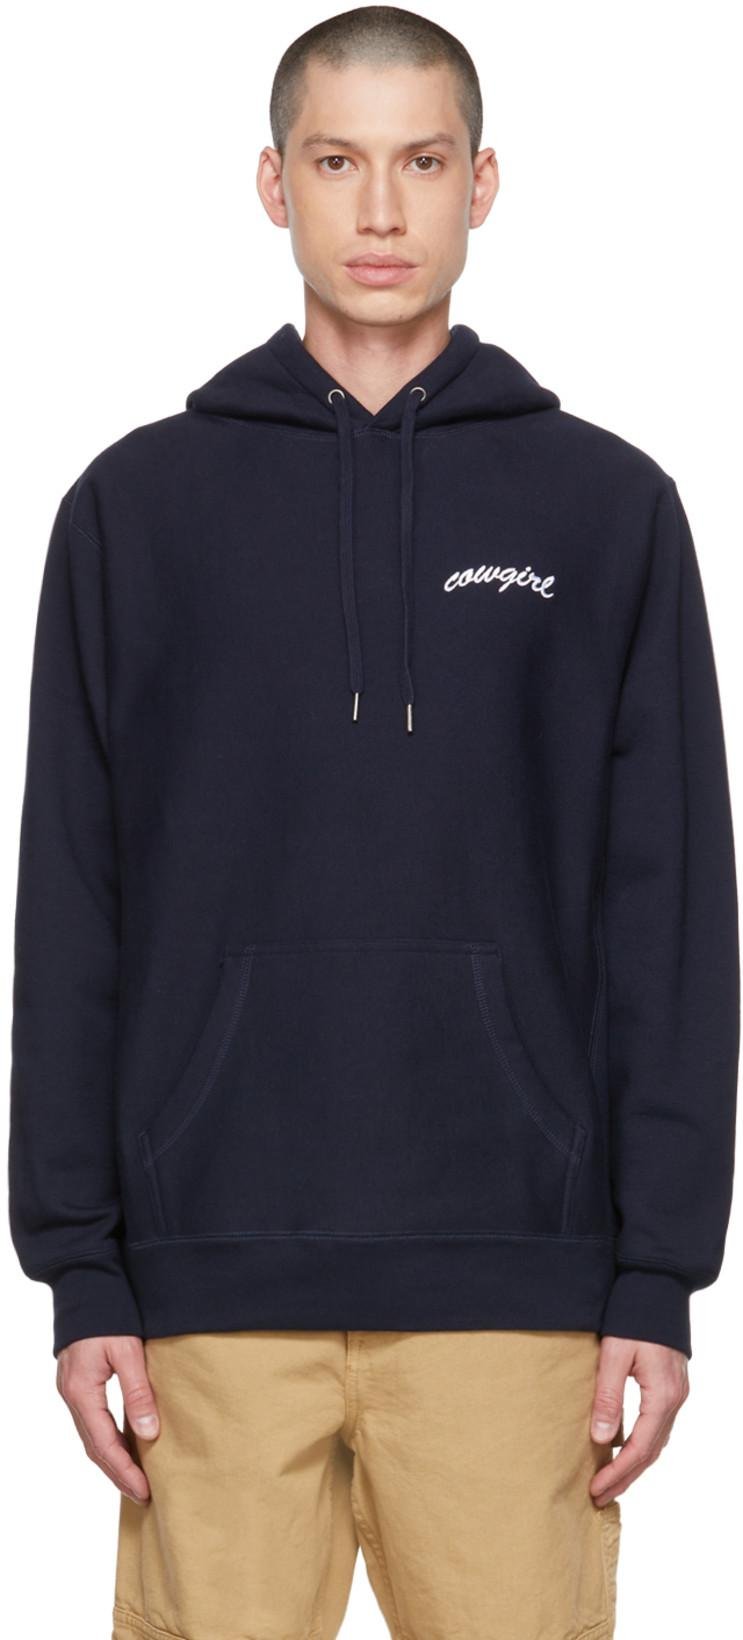 Navy Script Hoodie by COWGIRL BLUE CO